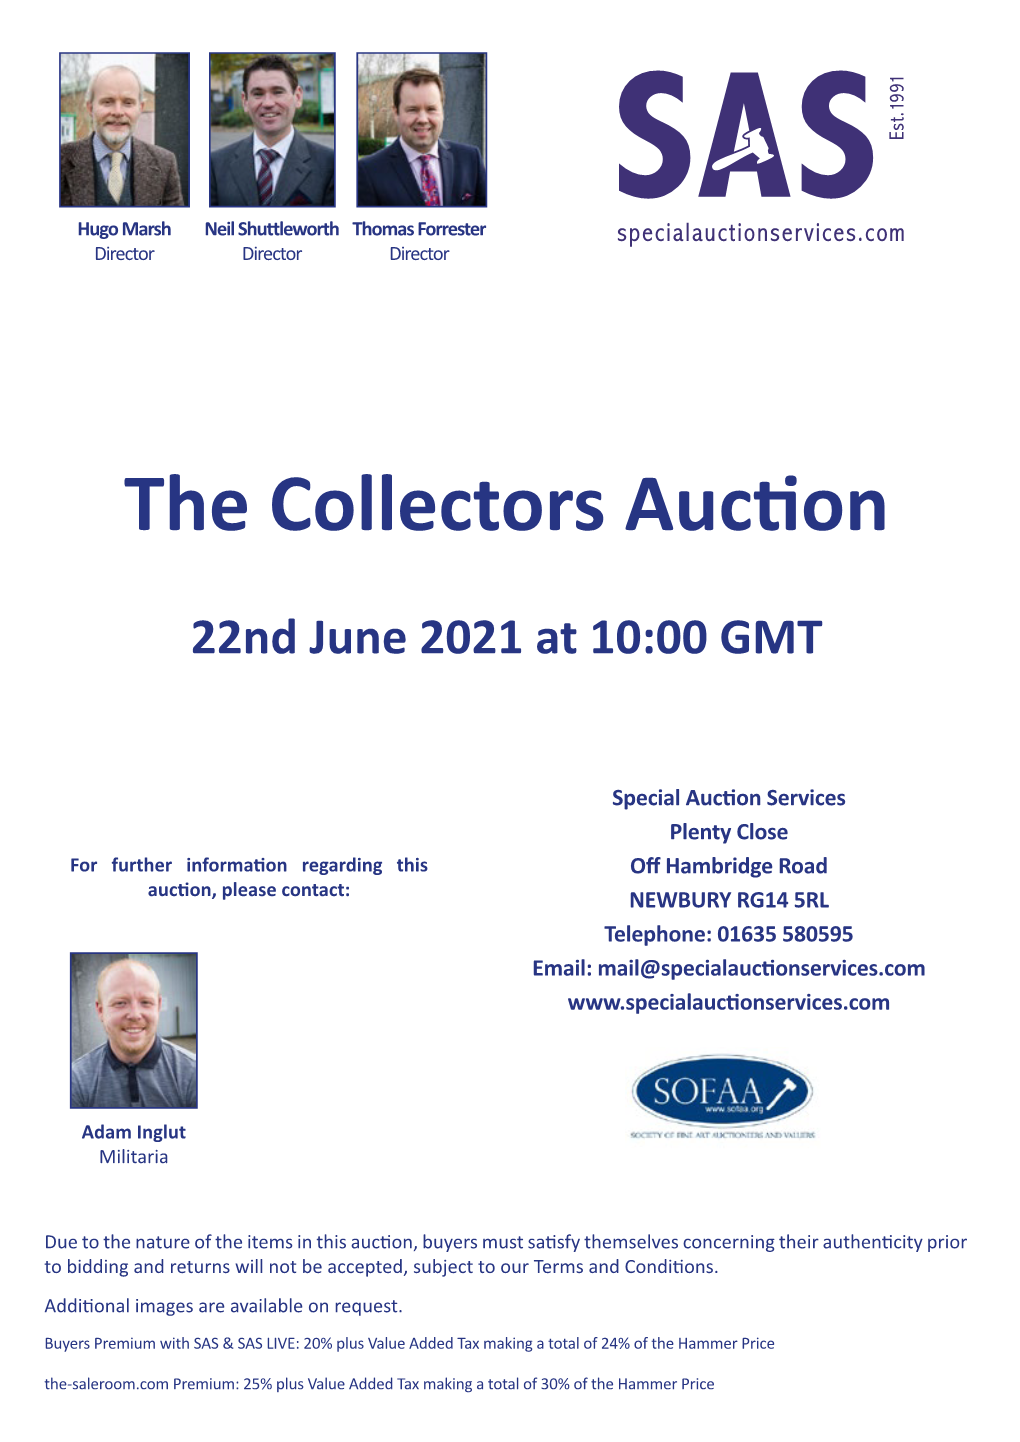 The Collectors Auction 22Nd June 2021 at 10:00 GMT